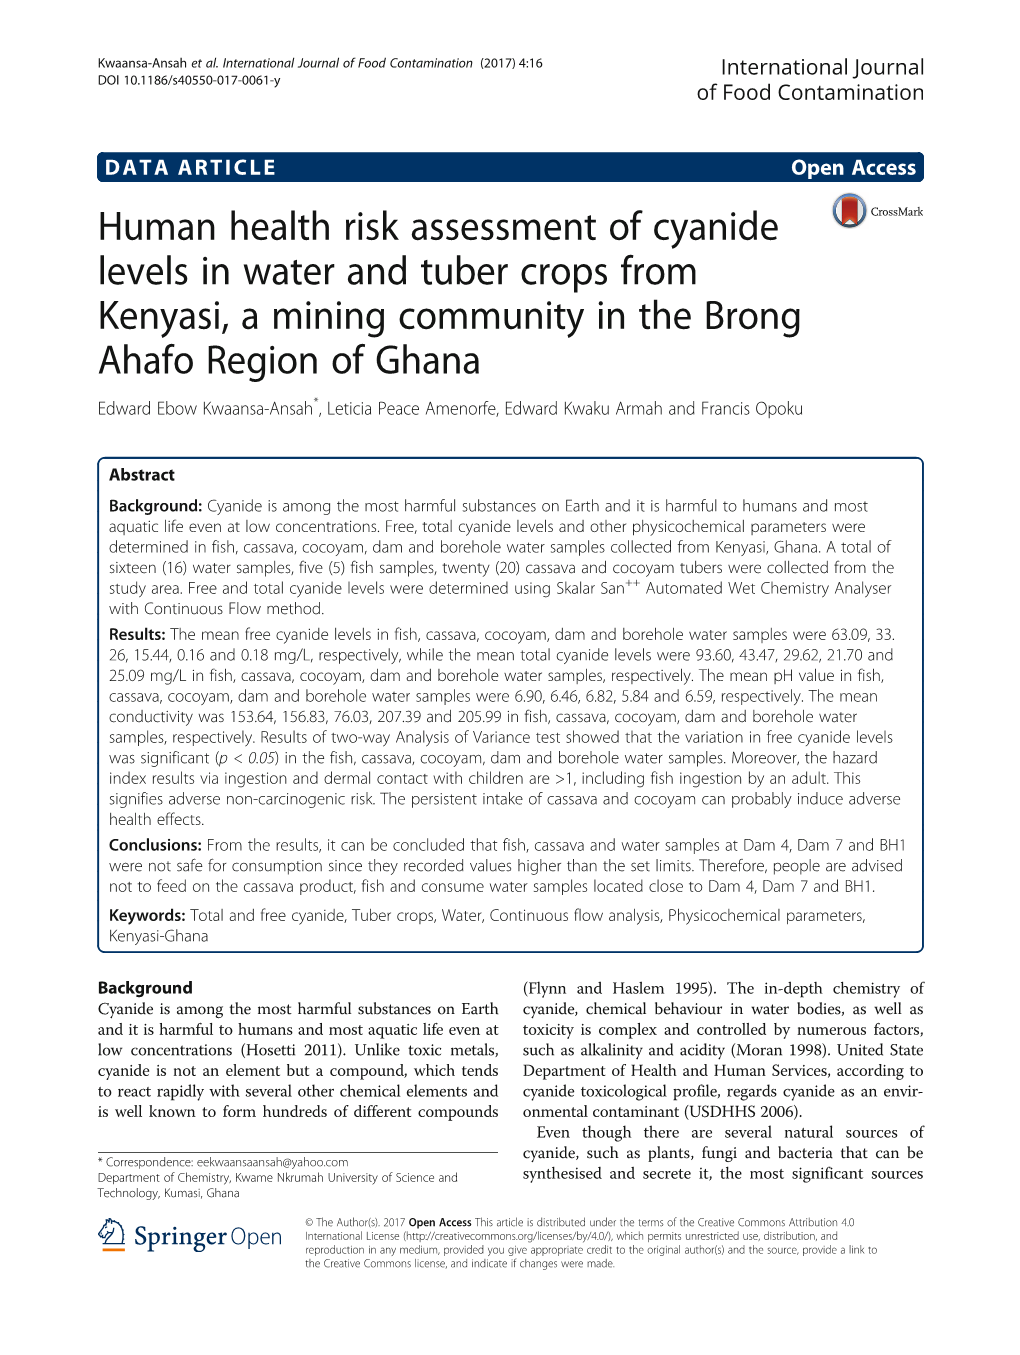 Human Health Risk Assessment of Cyanide Levels in Water and Tuber